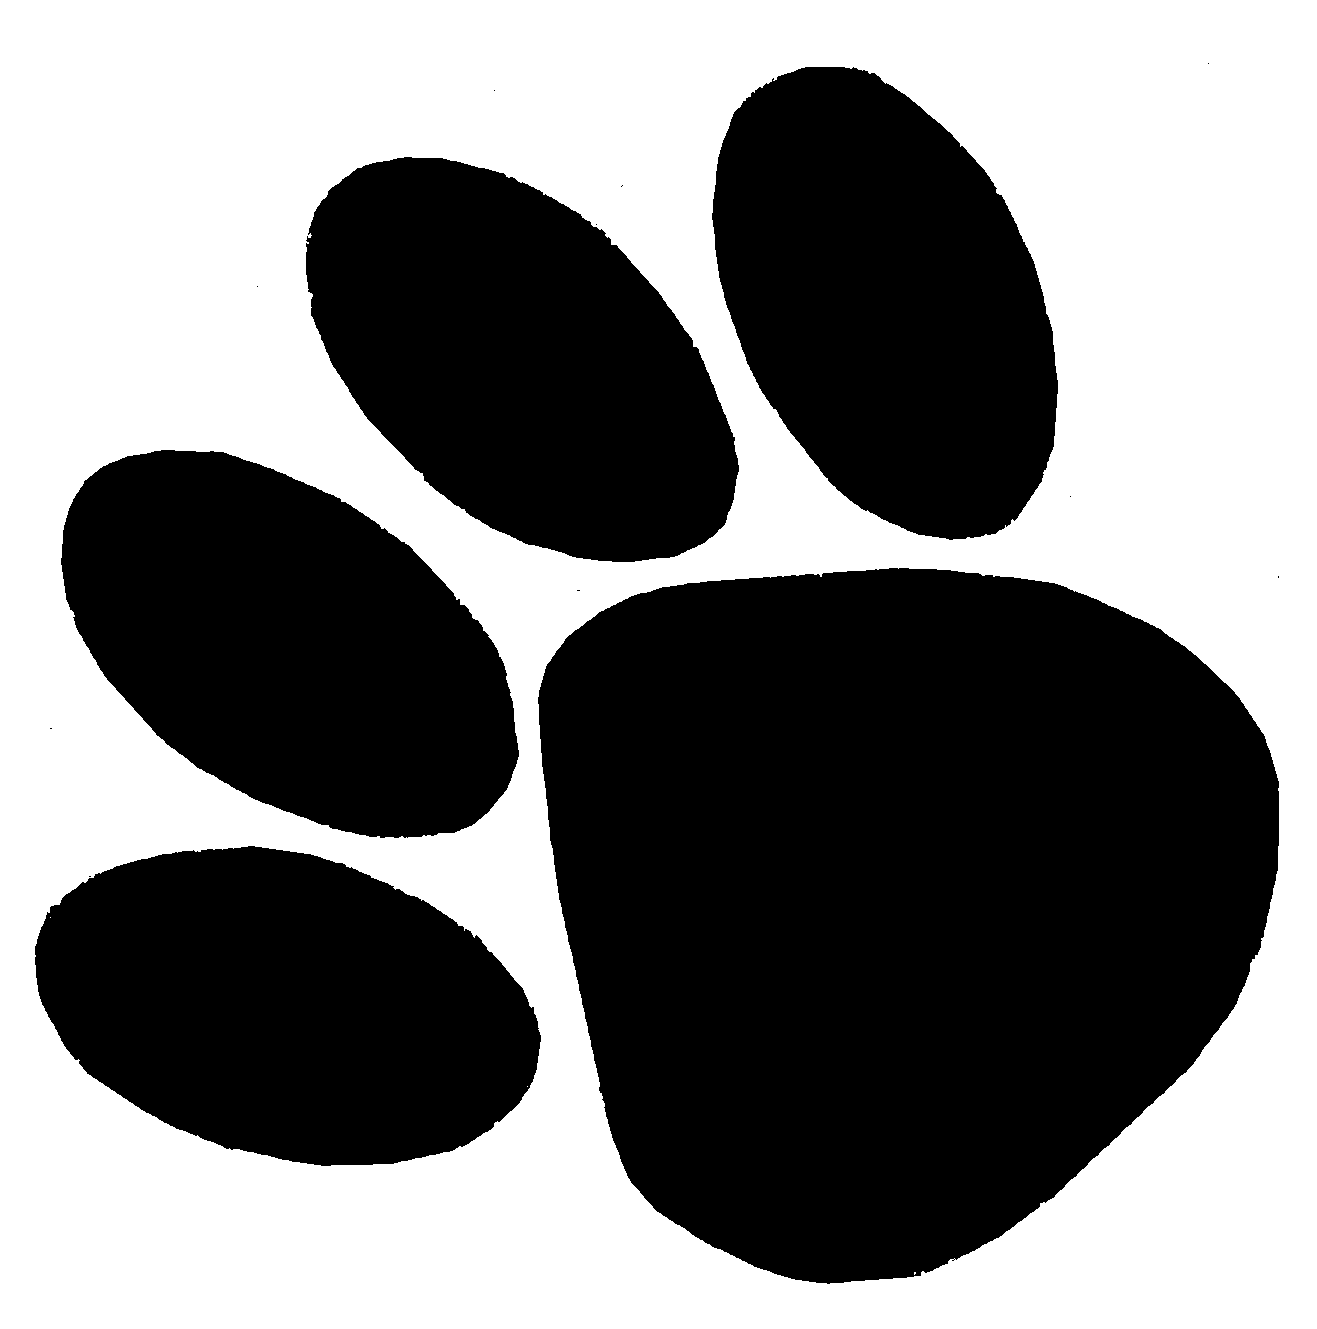 Image - Paw print.gif - Clipart library - Clipart library